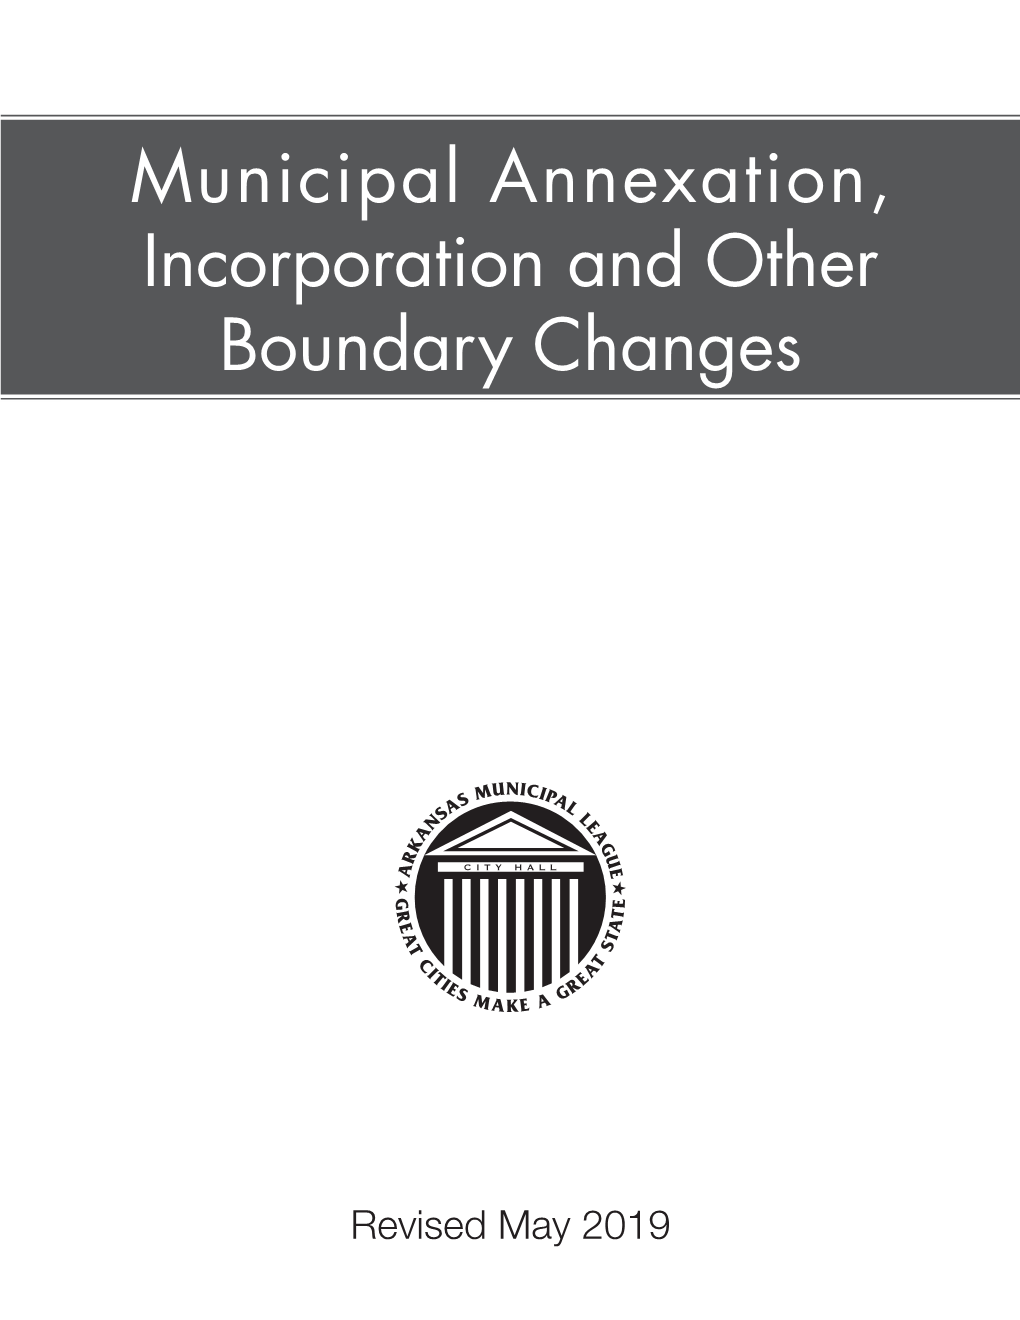 Municipal Annexation, Incorporation and Other Boundary Changes